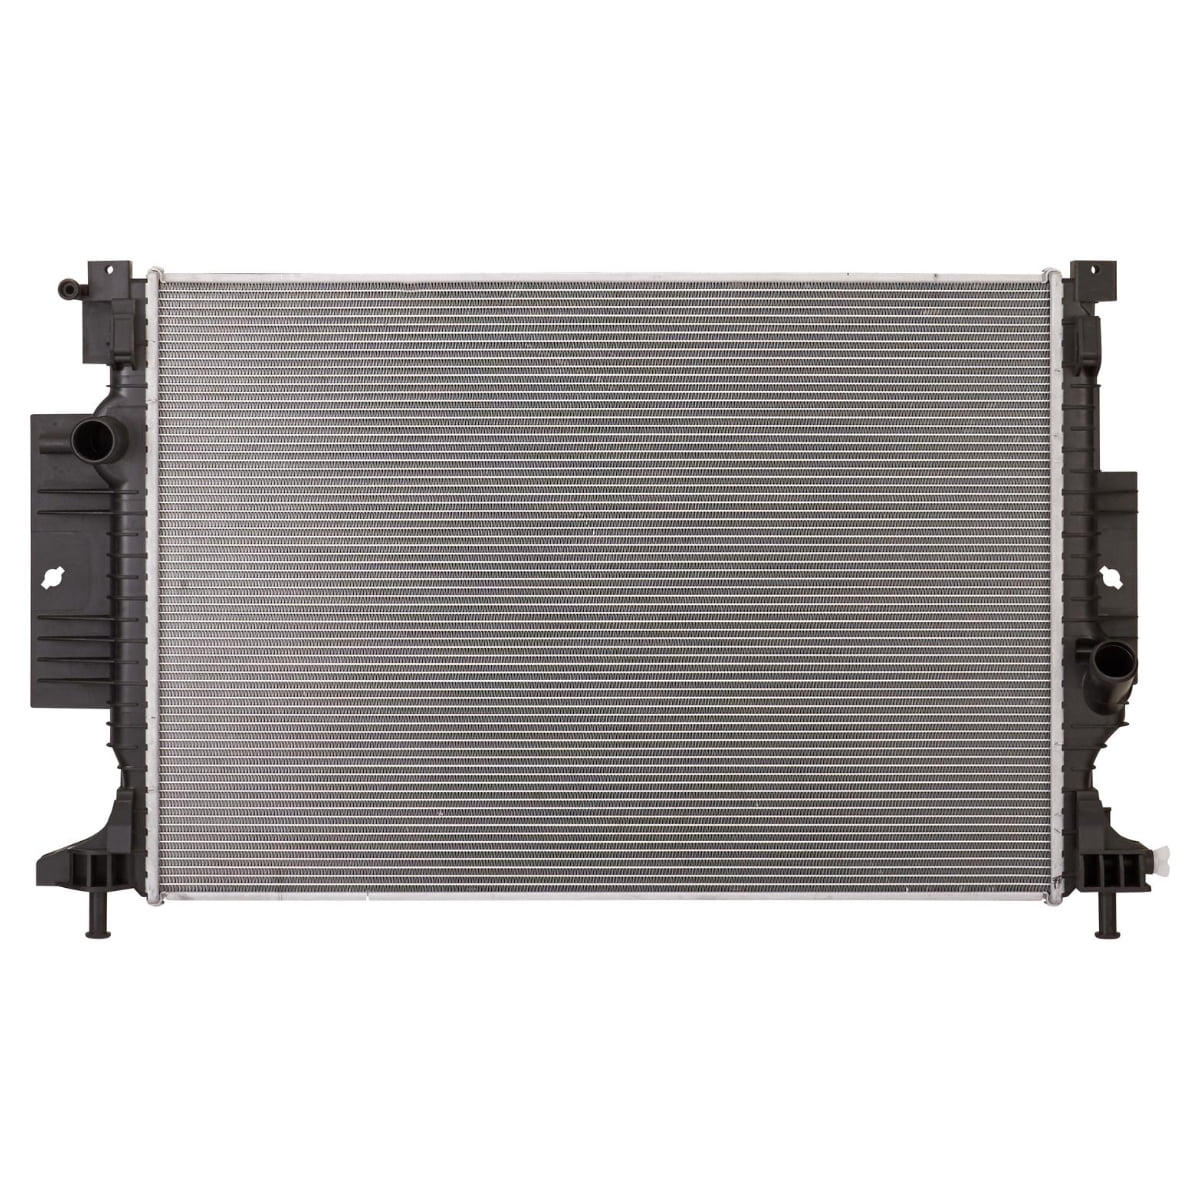 AutoShack Radiator Replacement for 2017-2019 Ford Escape 2019-2020 Transit  Connect 2015 2016 2017 2018 2019 Lincoln MKC 1.5L 2.0L 2.3L 2.5L AWD FWD